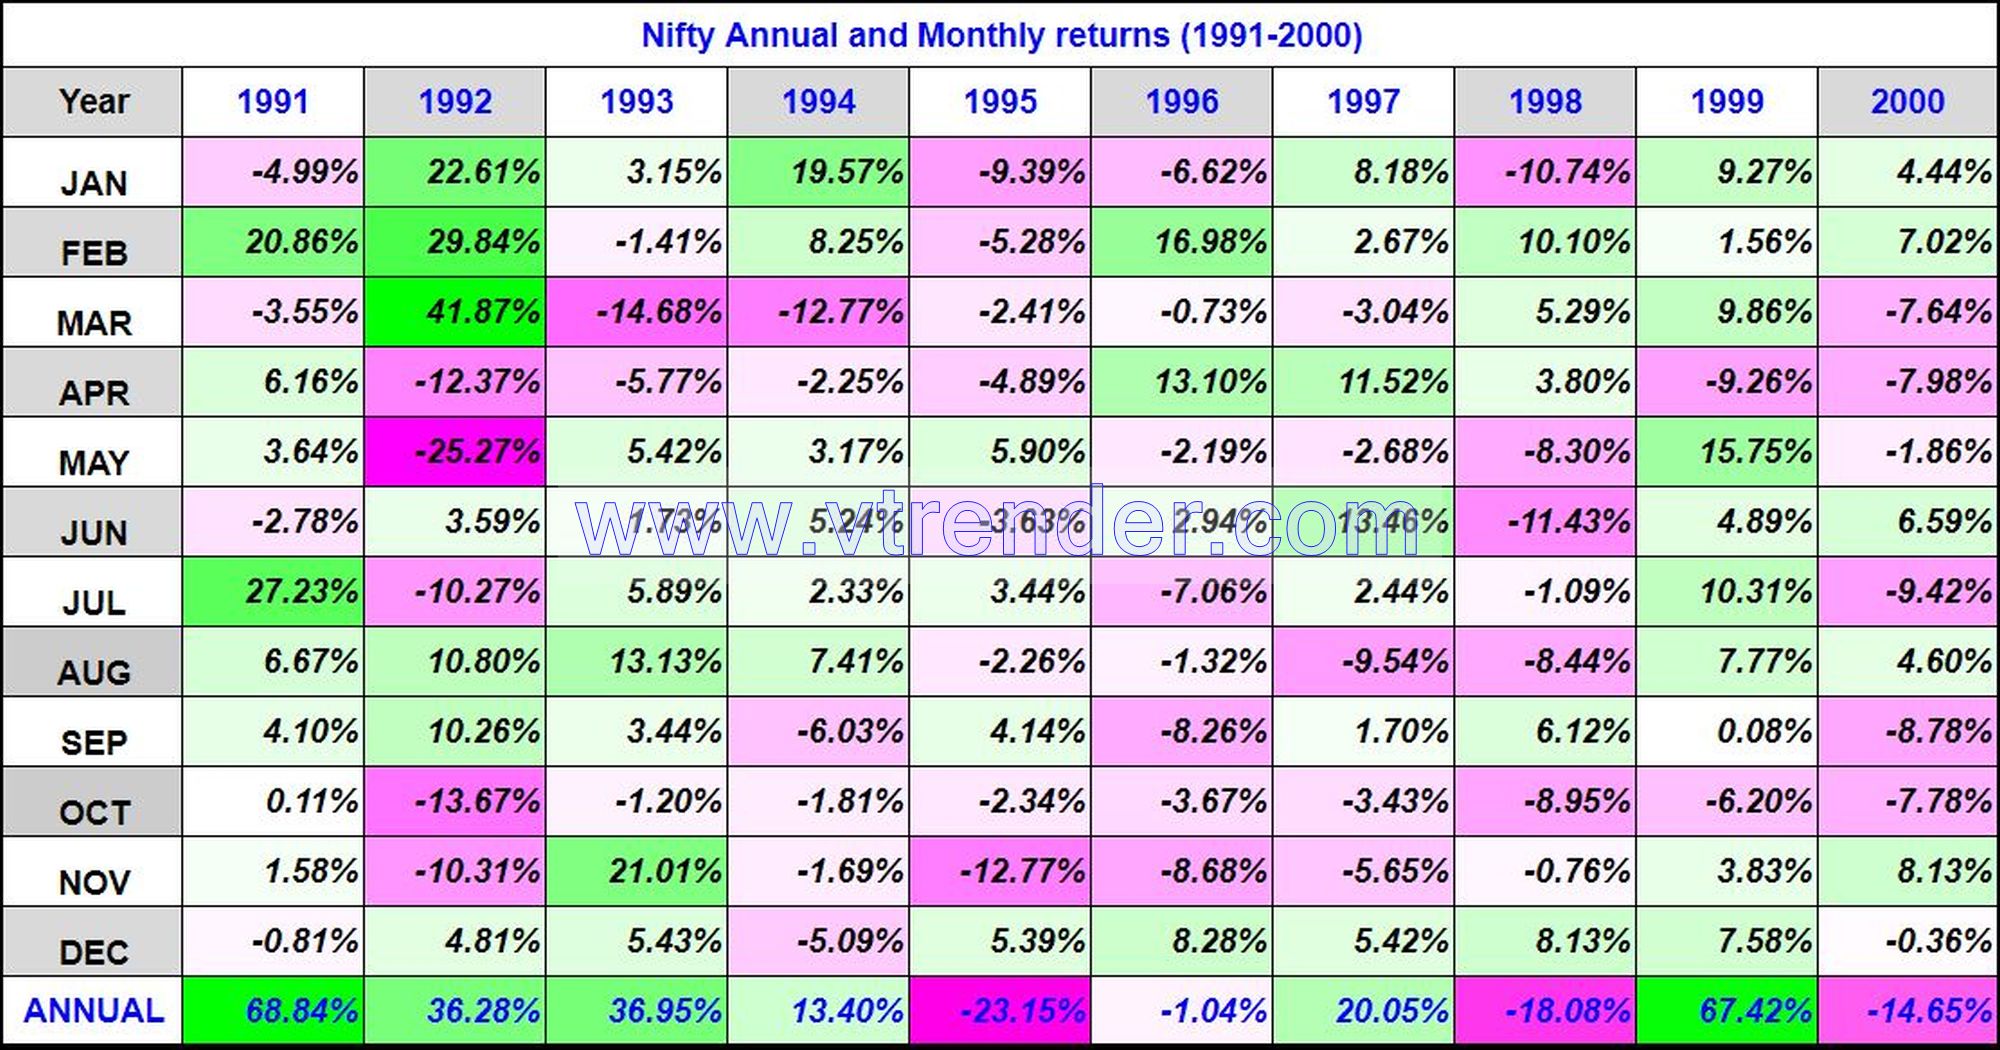 Niftyreturns1991 2000 Nifty 50 Monthly And Annual Returns (1991-2023) Updated 13Th Apr 2023 Annual, Monthly, Nifty Returns